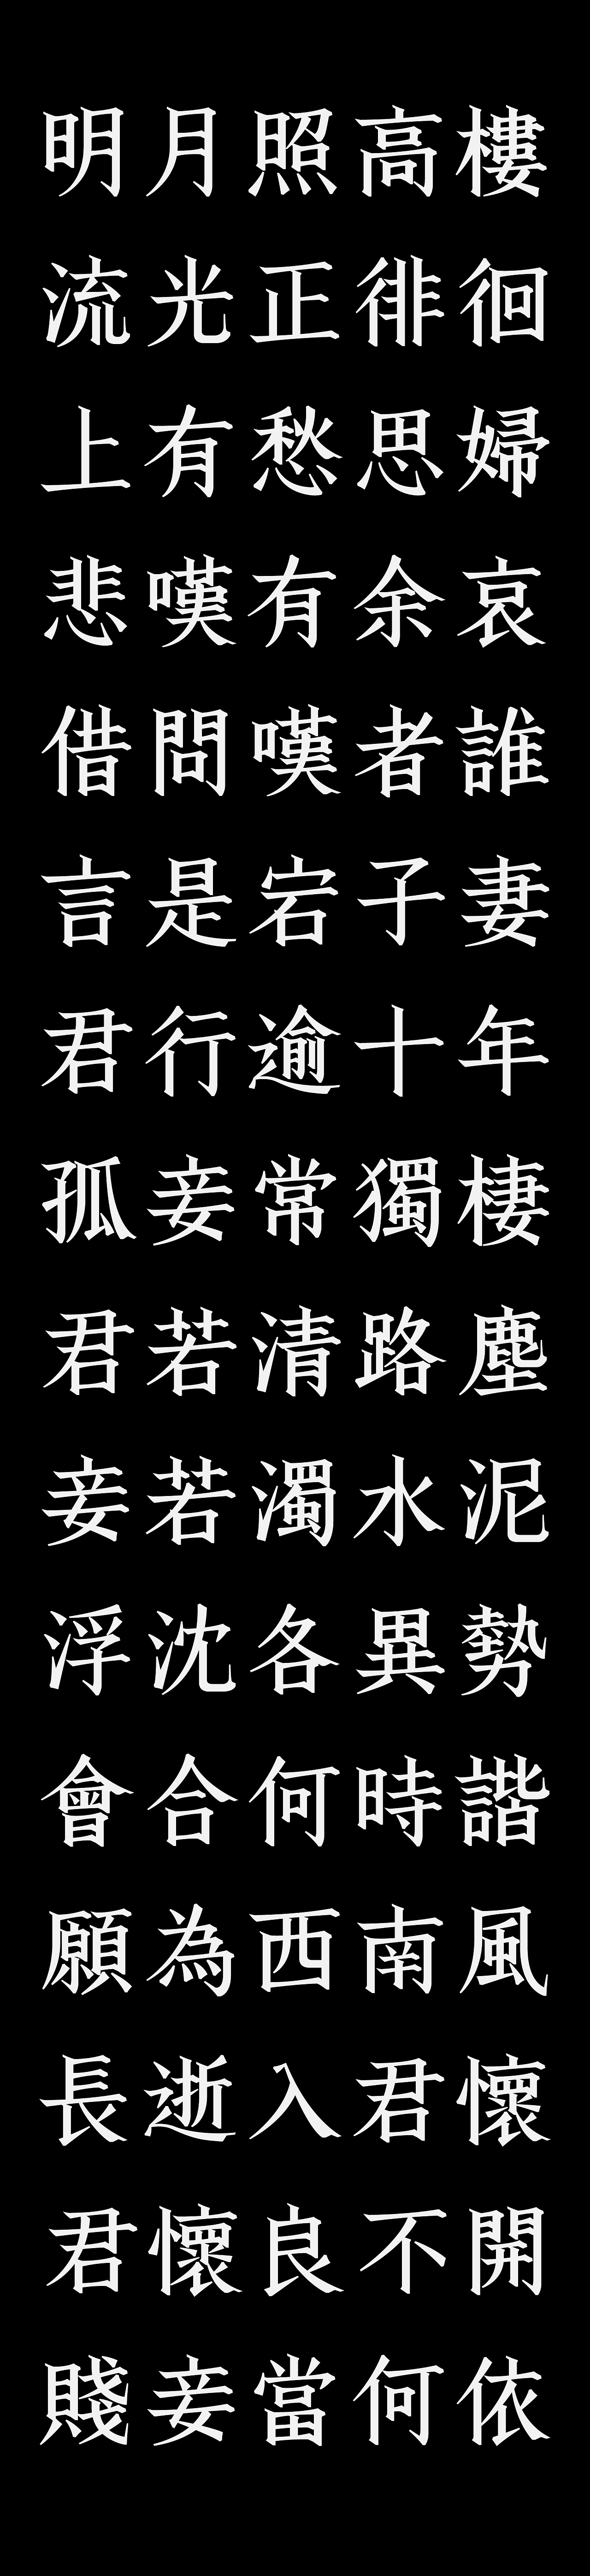 Chinese Creative Font Design-What kind of mood does poet Cao zhi have in writing this poem of seven mourning?